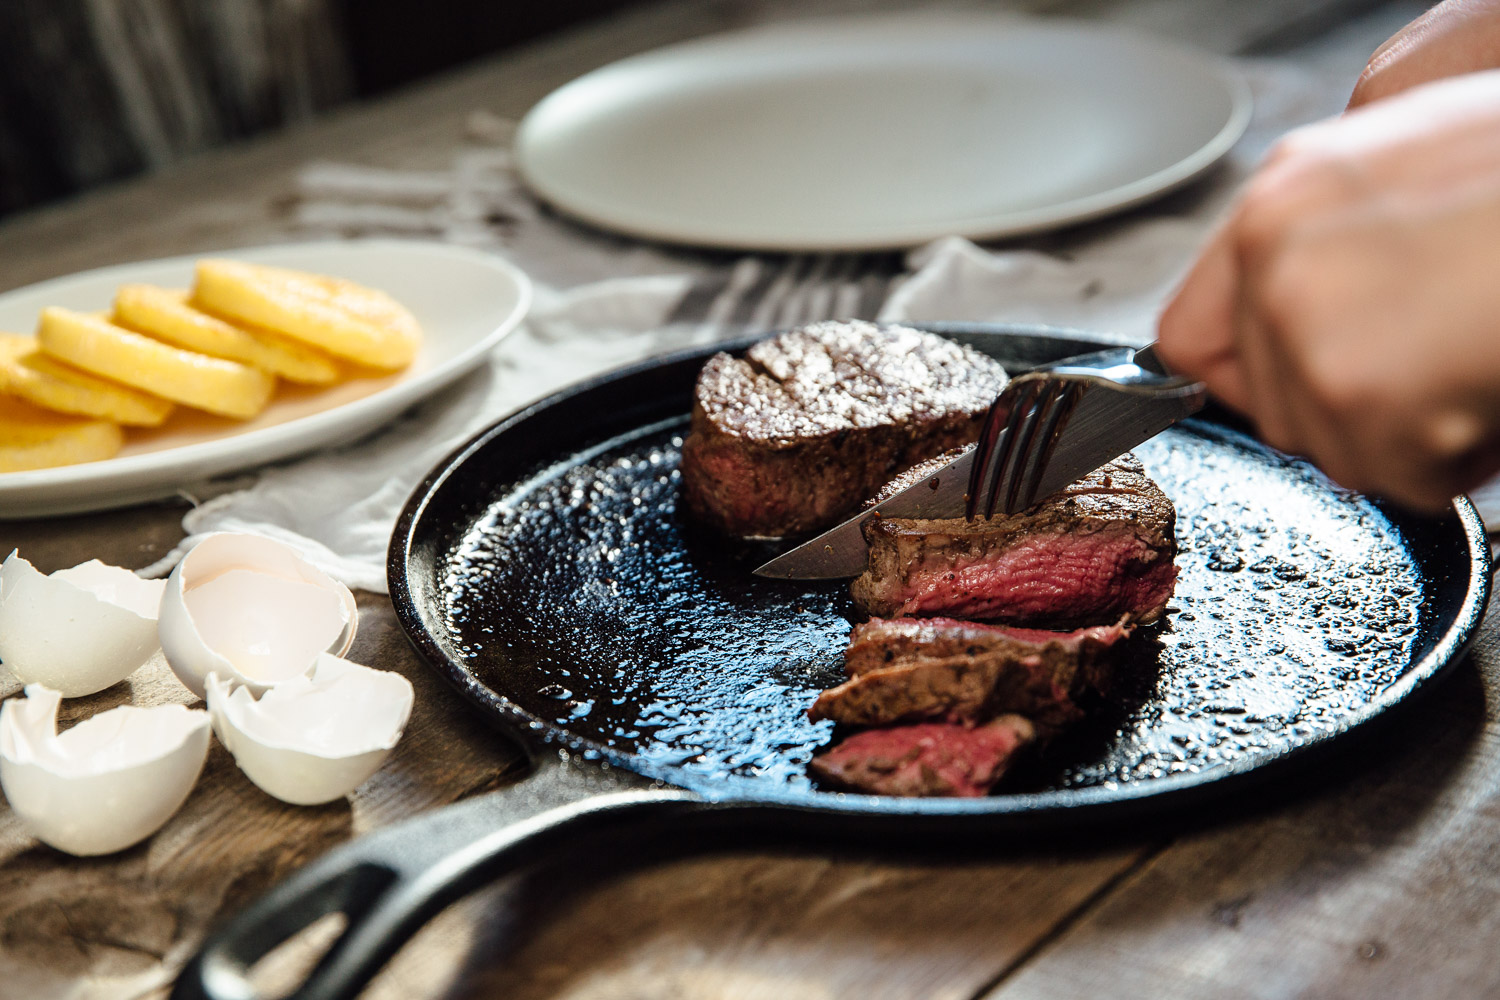 Surprise the wonderful man in your life with premium meaty goodness. Any steak is sure to win his heart, but try this filet mignon and polenta recipe for a beautiful breakfast